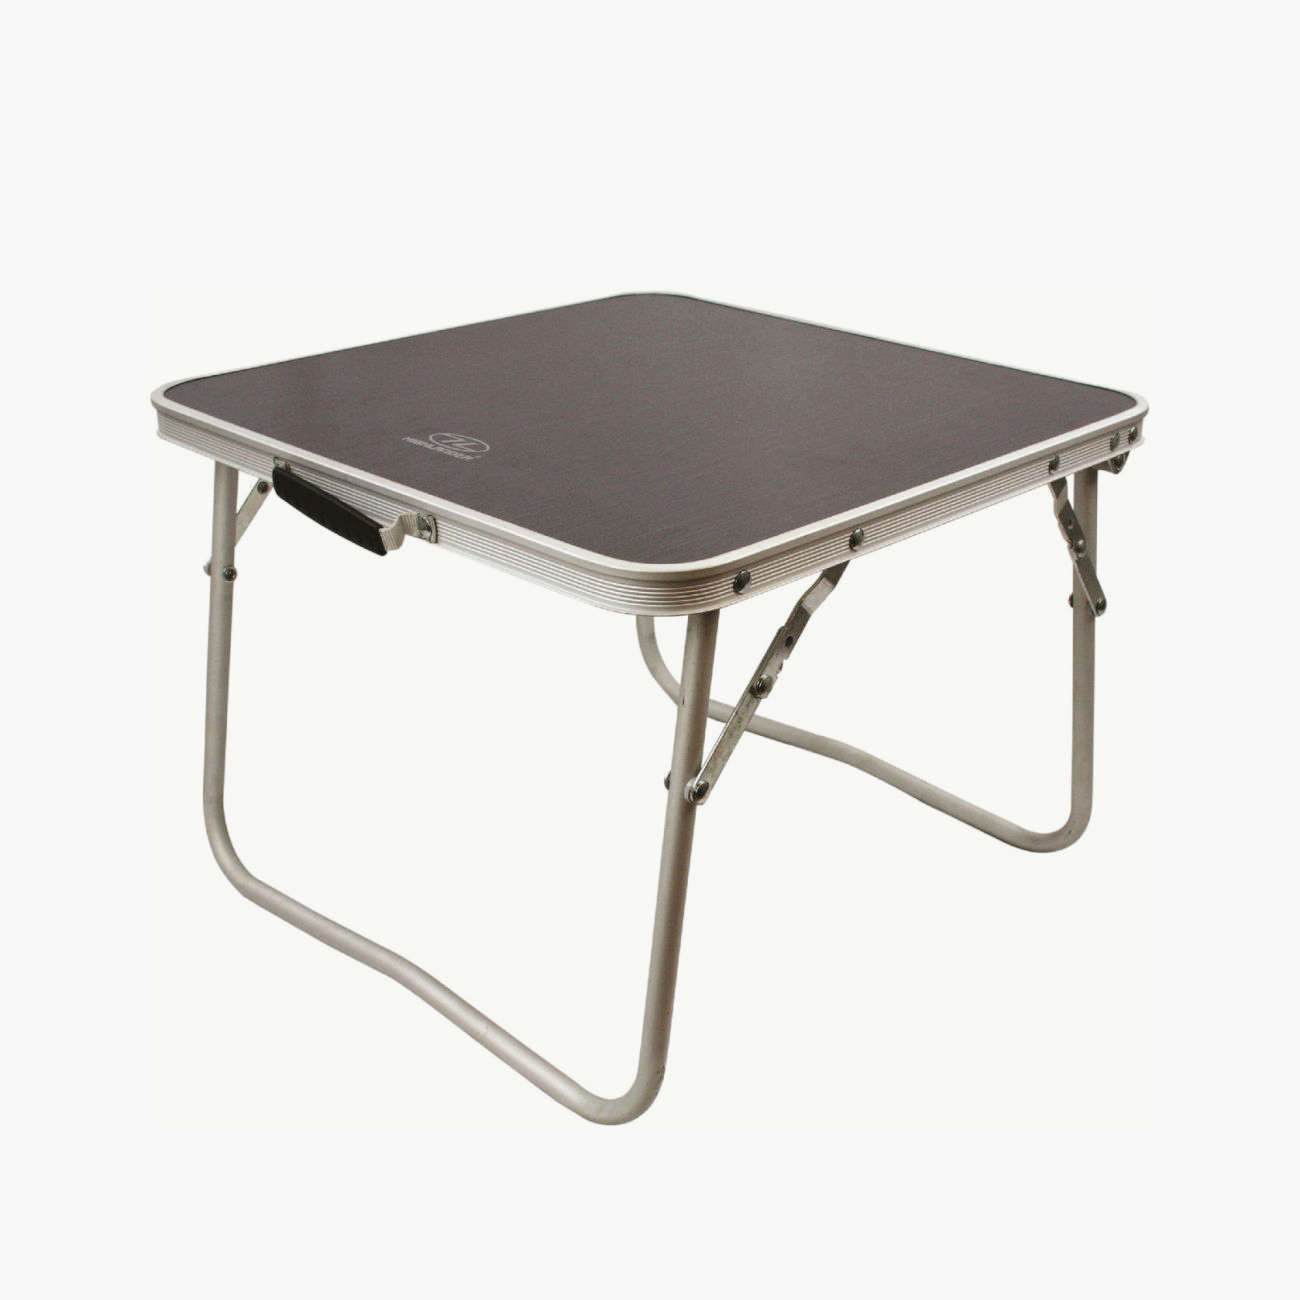 Highlander Small Folding Table  Lomo Watersport UK. Wetsuits, Dry Bags &  Outdoor Gear.